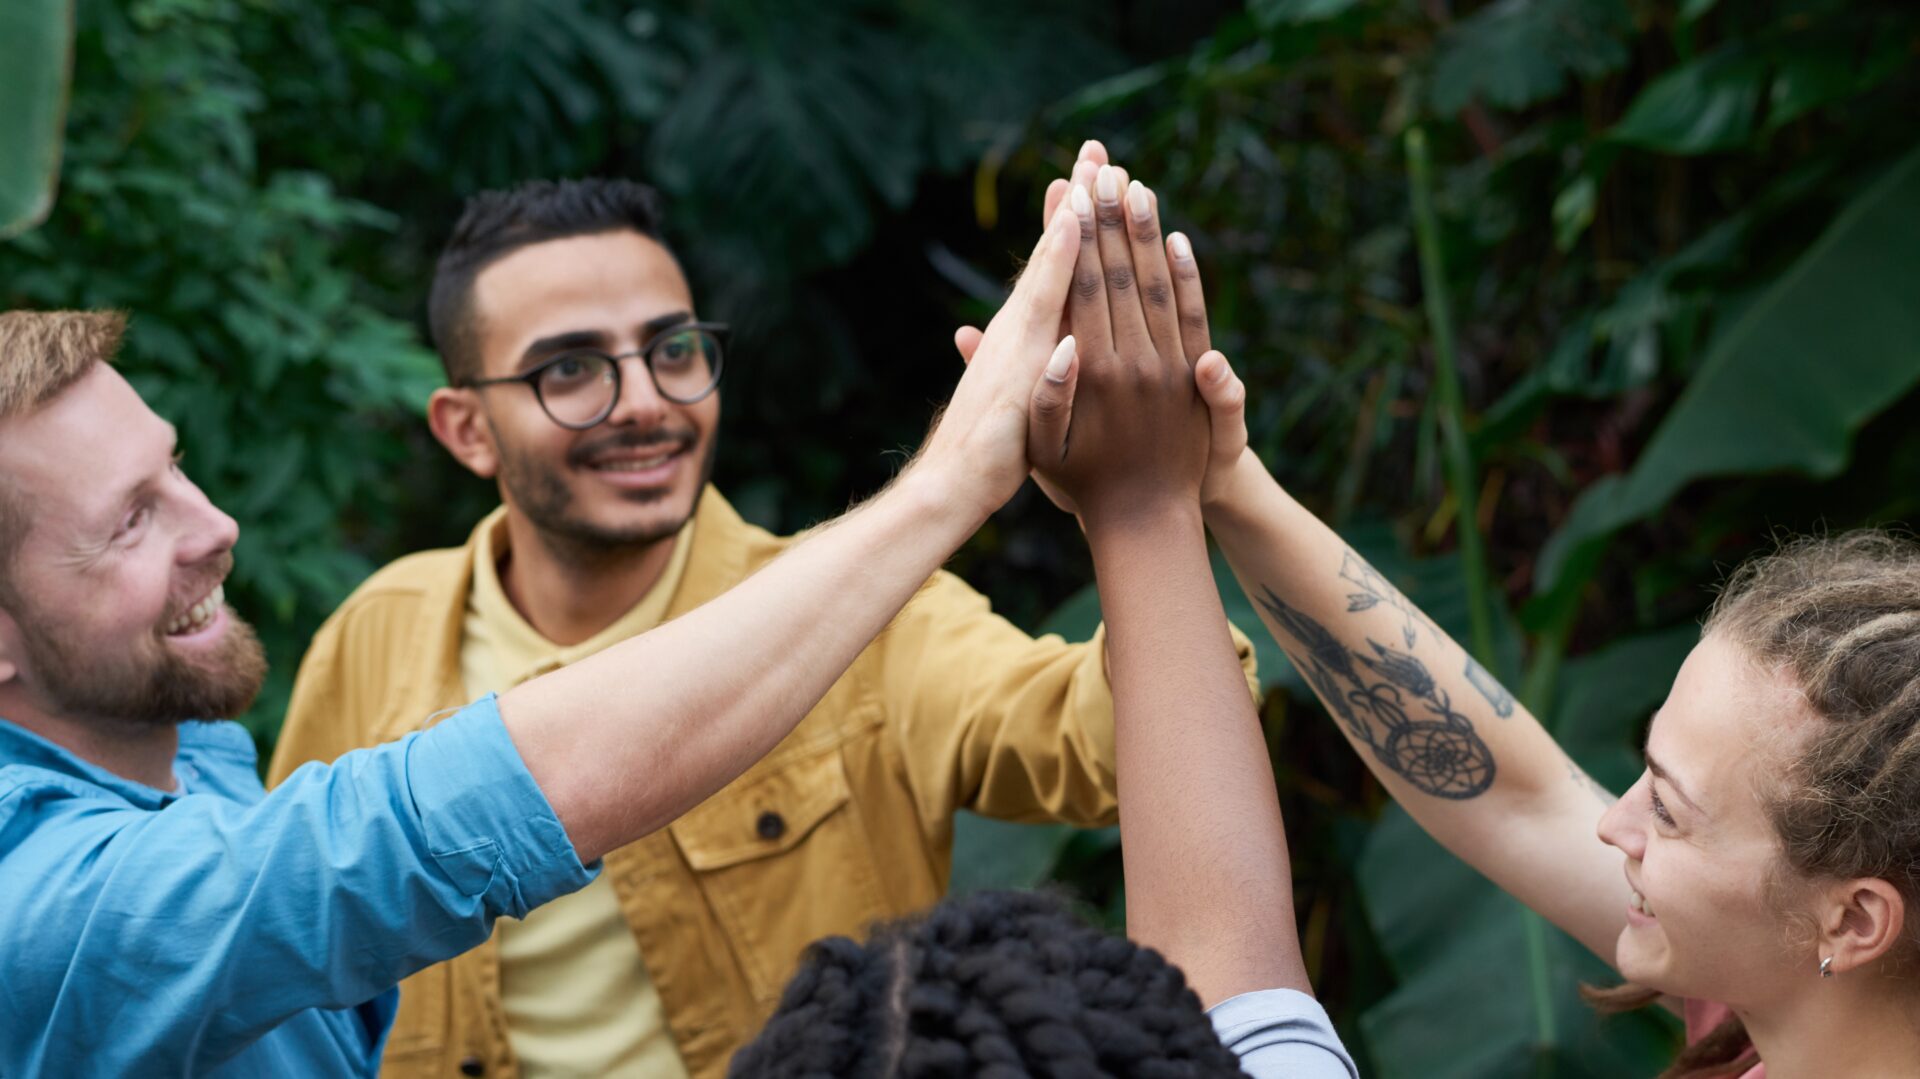 People doing an awkward group high five (Photo by fauxels on Pexels)